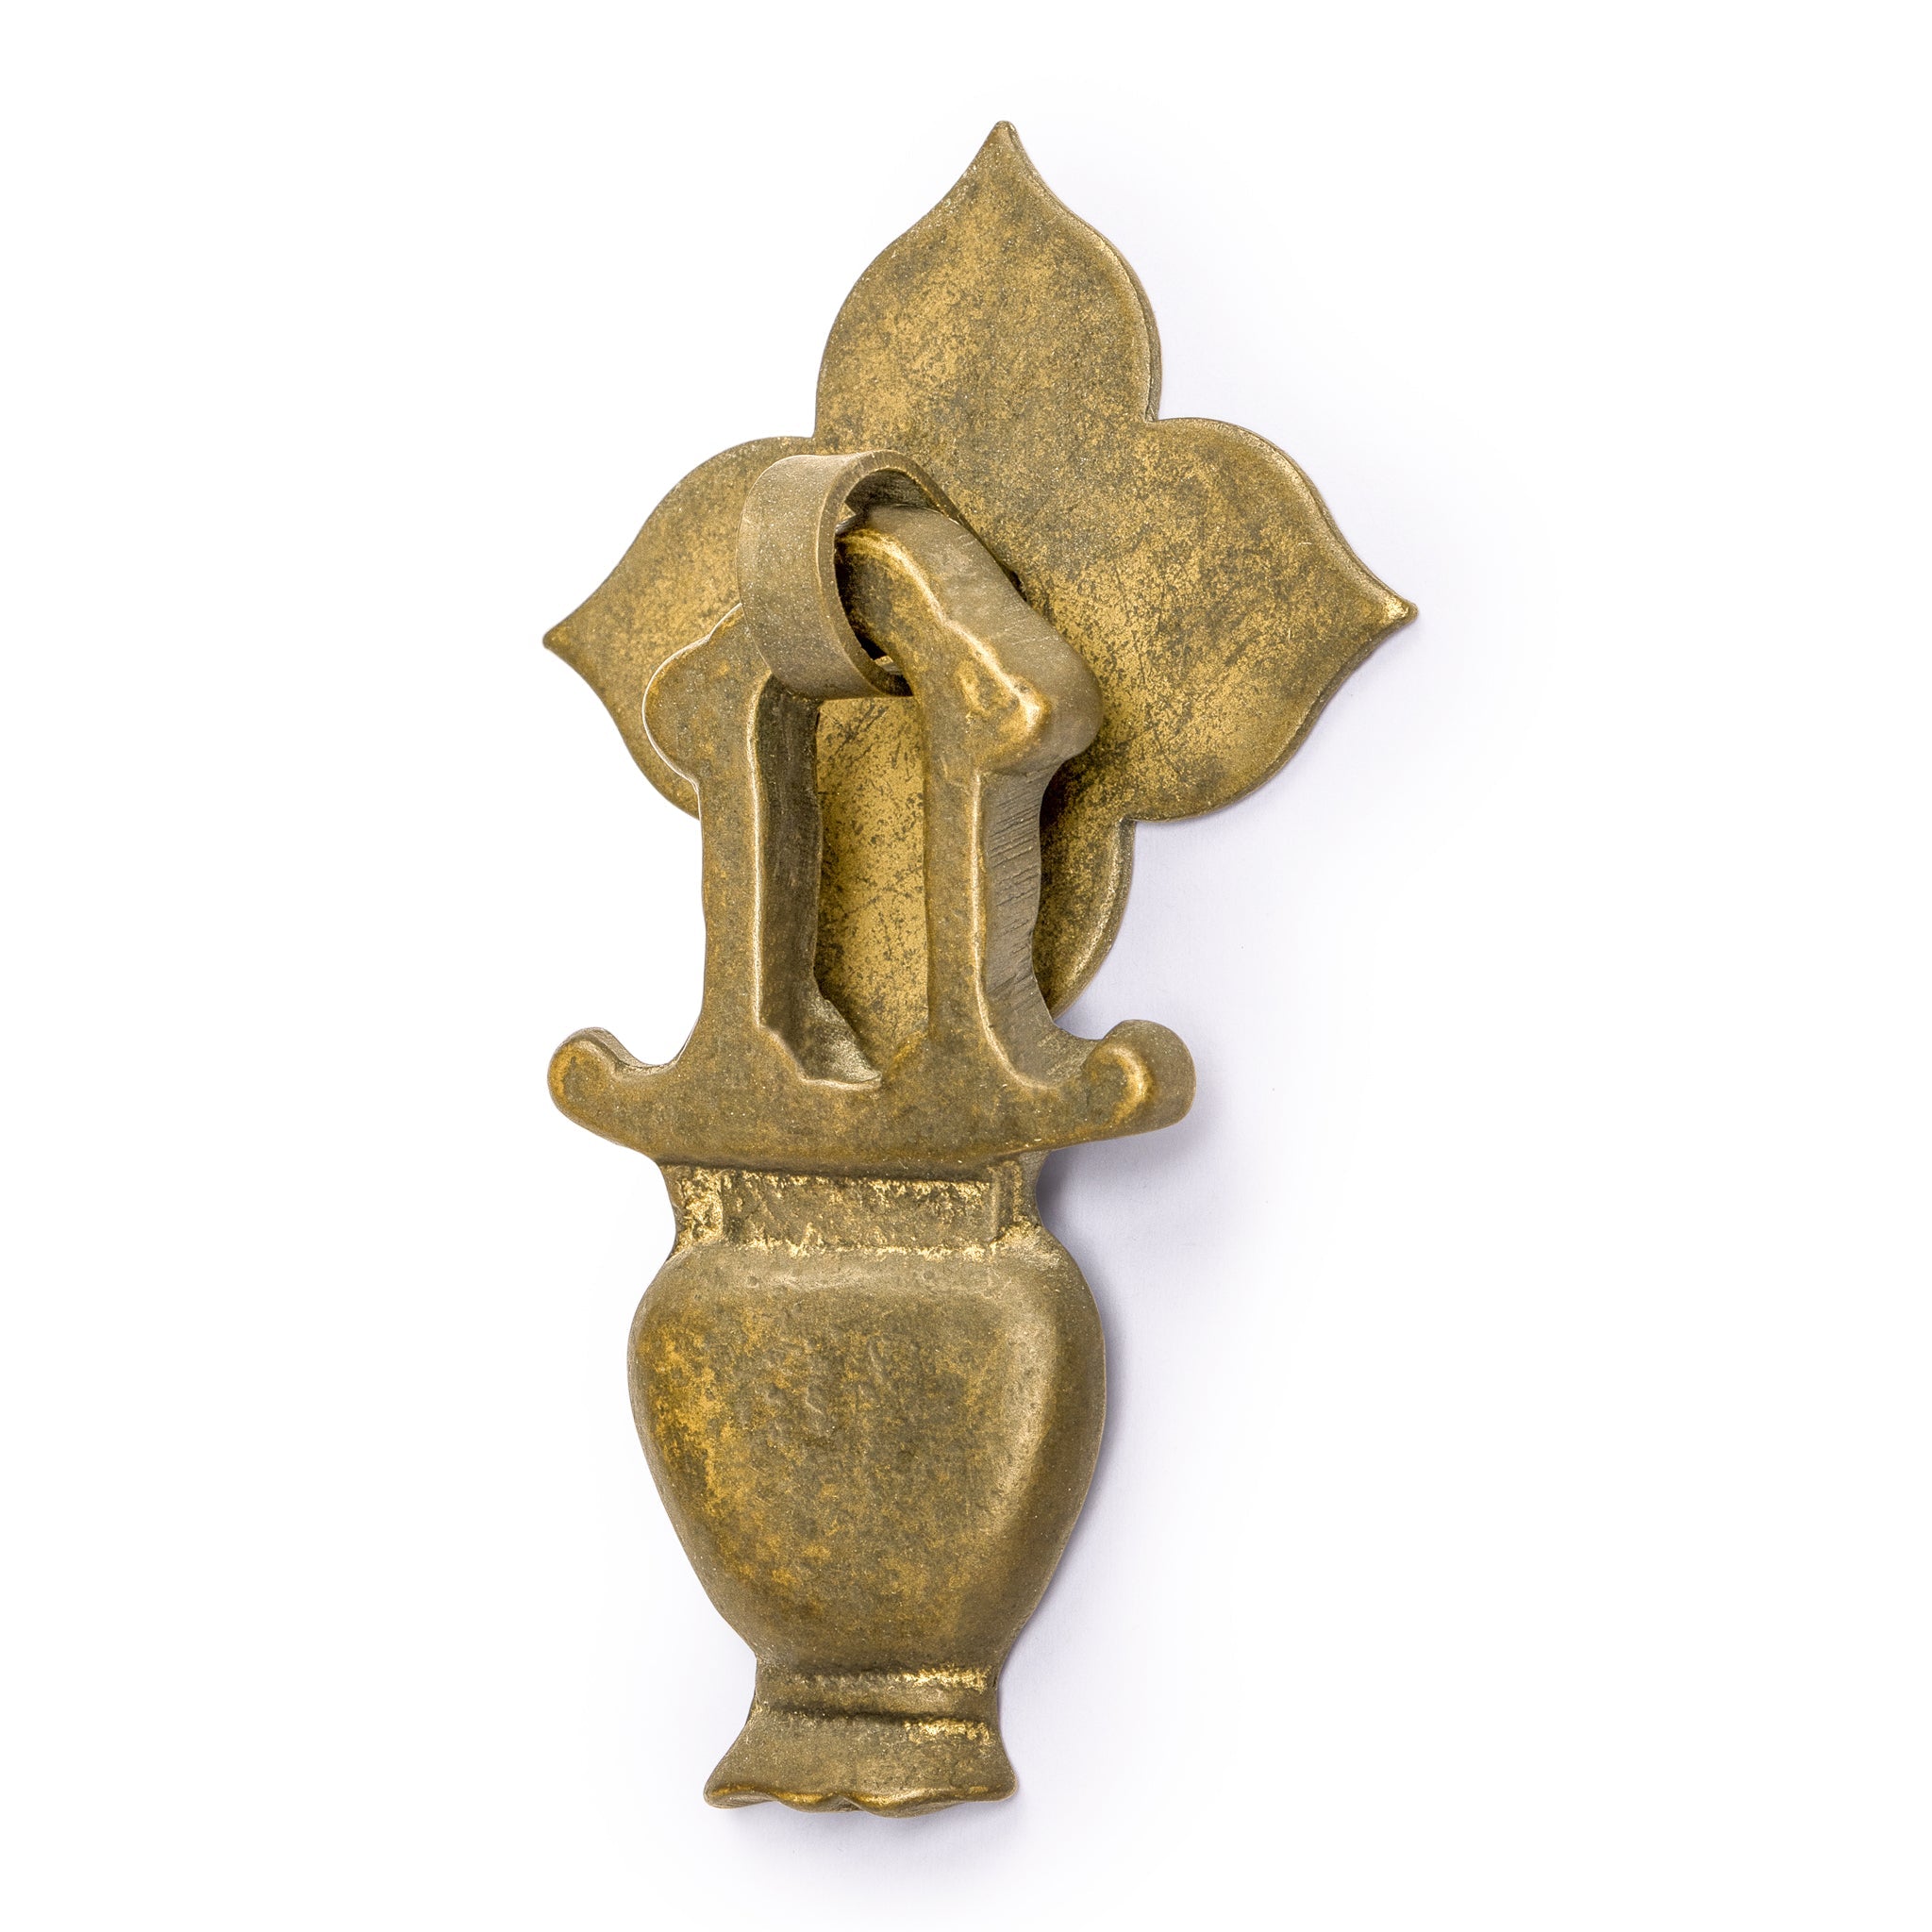 Golden Furnace and Flower Pulls 2.1" - Set of 2-Chinese Brass Hardware